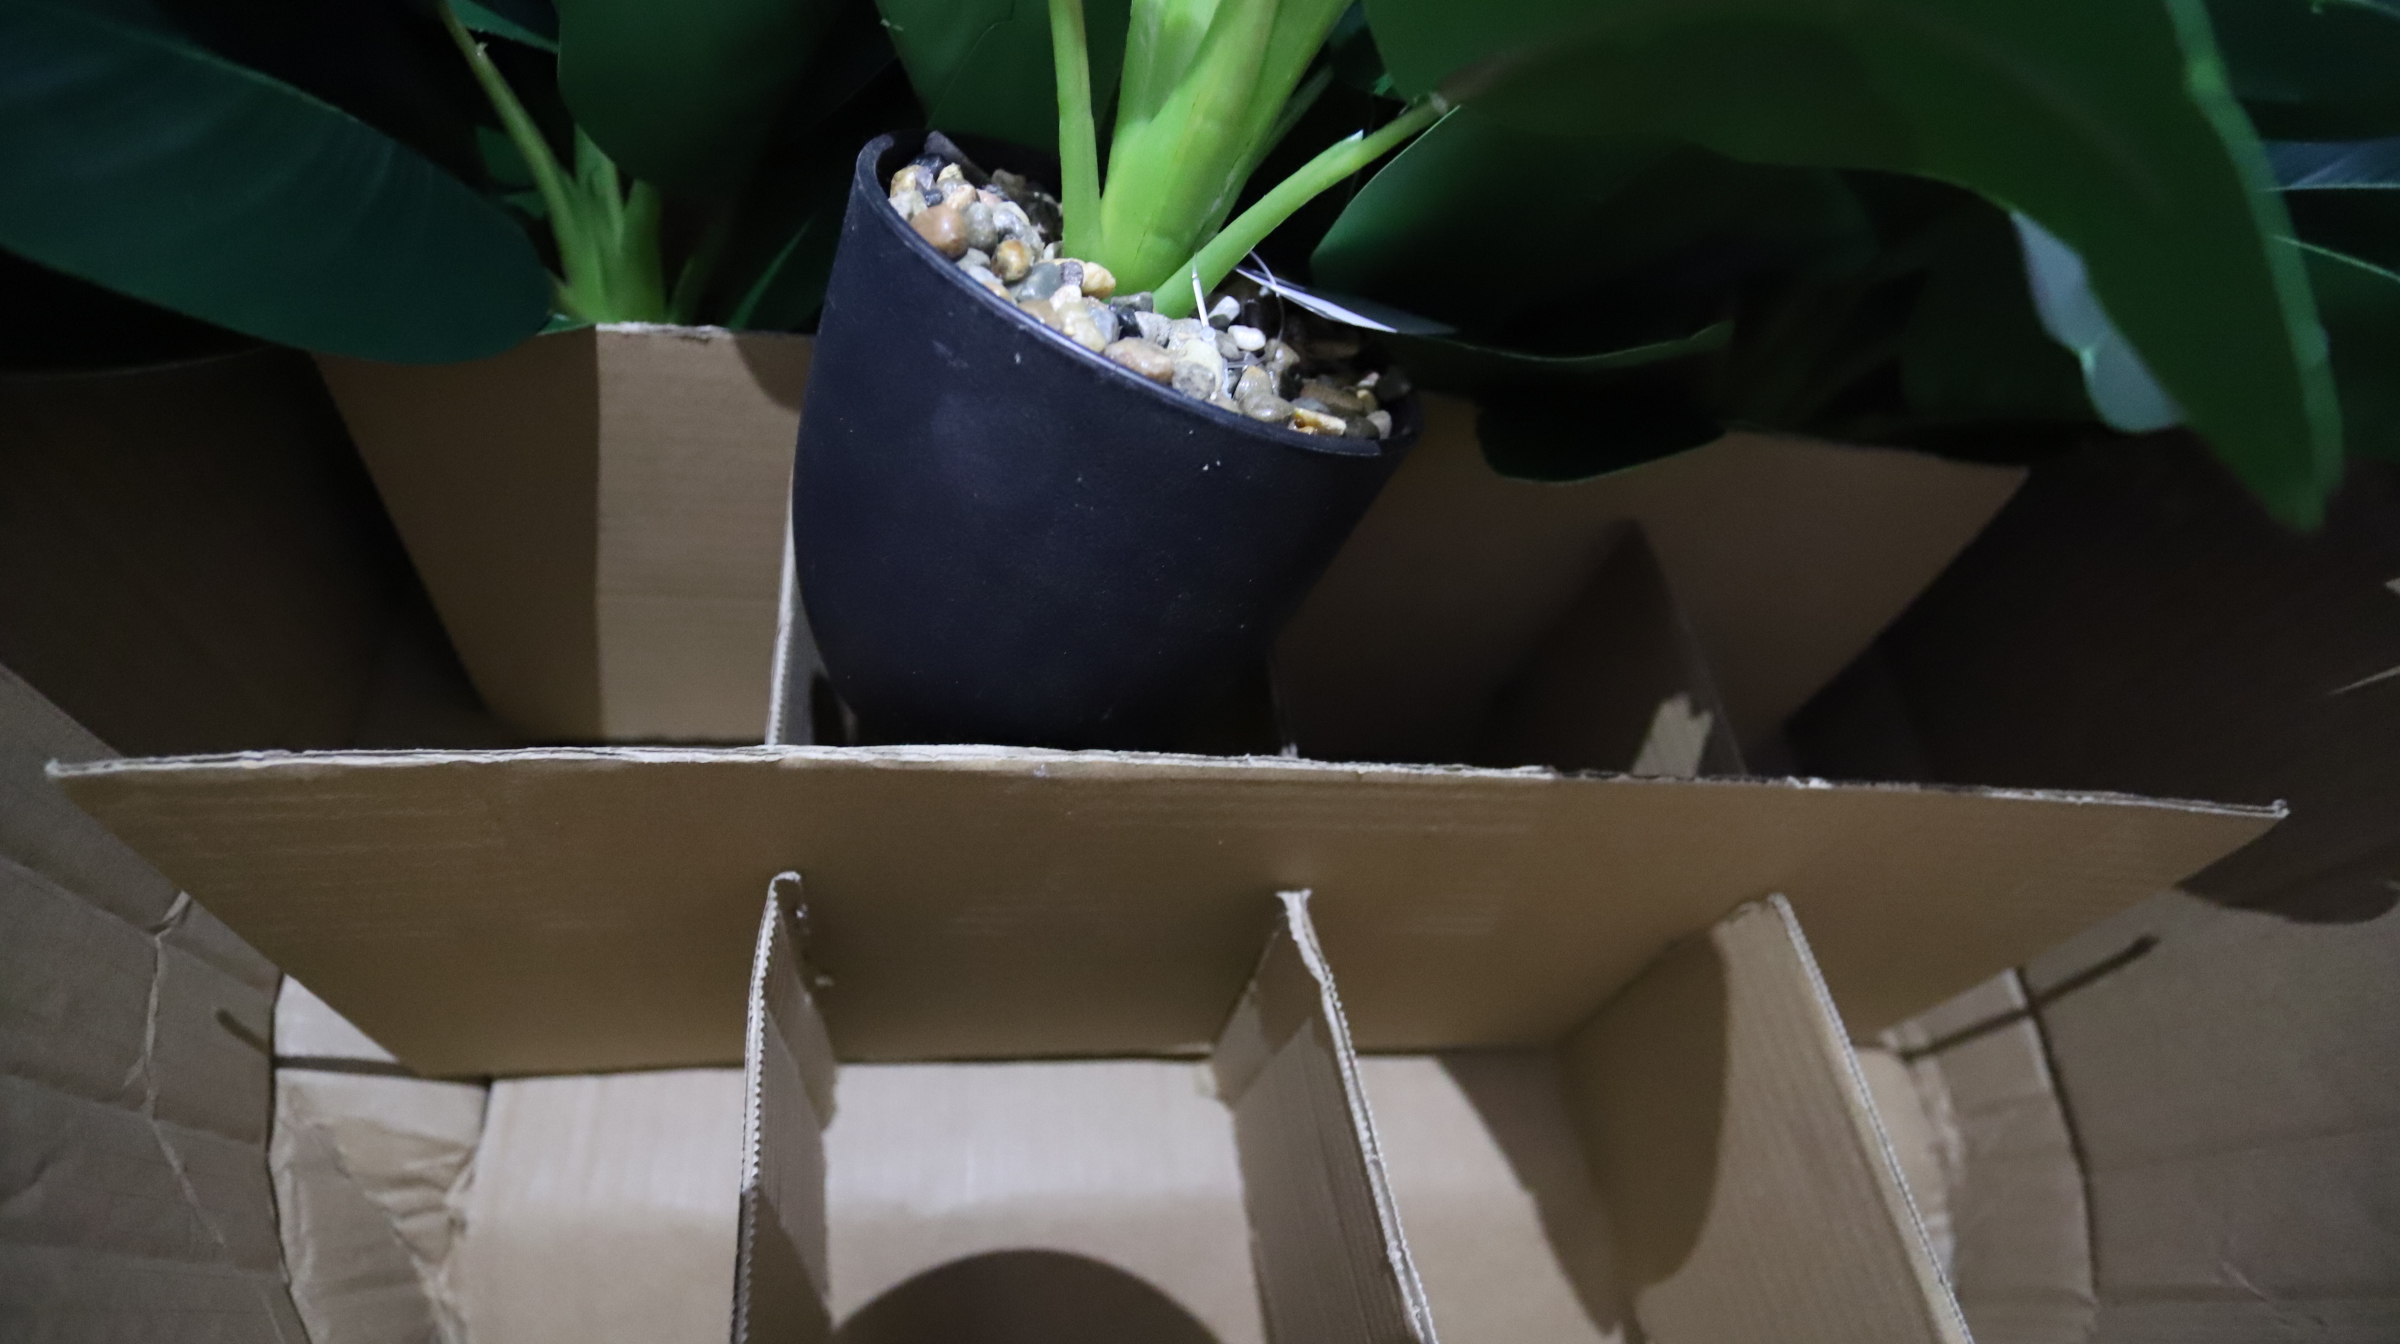 The use of sturdy, yet sustainable materials in packaging reflects the industry's commitment to delivering quality while being mindful of the environment.